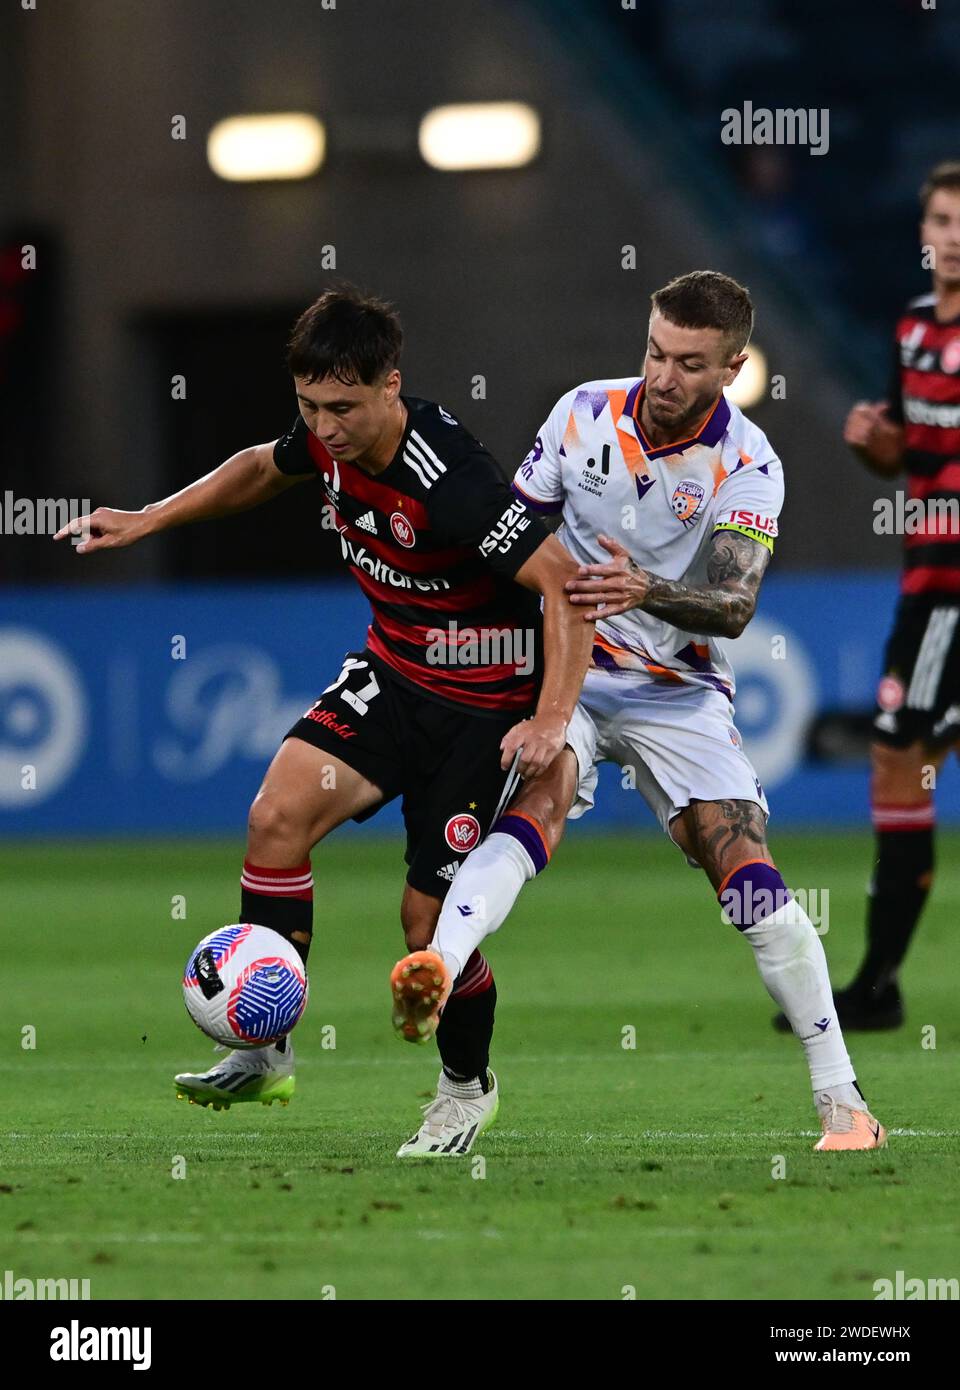 Parramatta, Australia. 20th Jan, 2024. Aidan Simmons (L) of Western Sydney Wanderers FC and Adam Jake Taggart (R) of Perth Glory FC are seen in action during the Isuzu UTE Men's A-League 2023/24 season round 13 match between Western Sydney Wanderers FC and Perth Glory FC held at the CommBank Stadium. Final score; Western Sydney Wanderers 1:2 Perth Glory FC. Credit: SOPA Images Limited/Alamy Live News Stock Photo